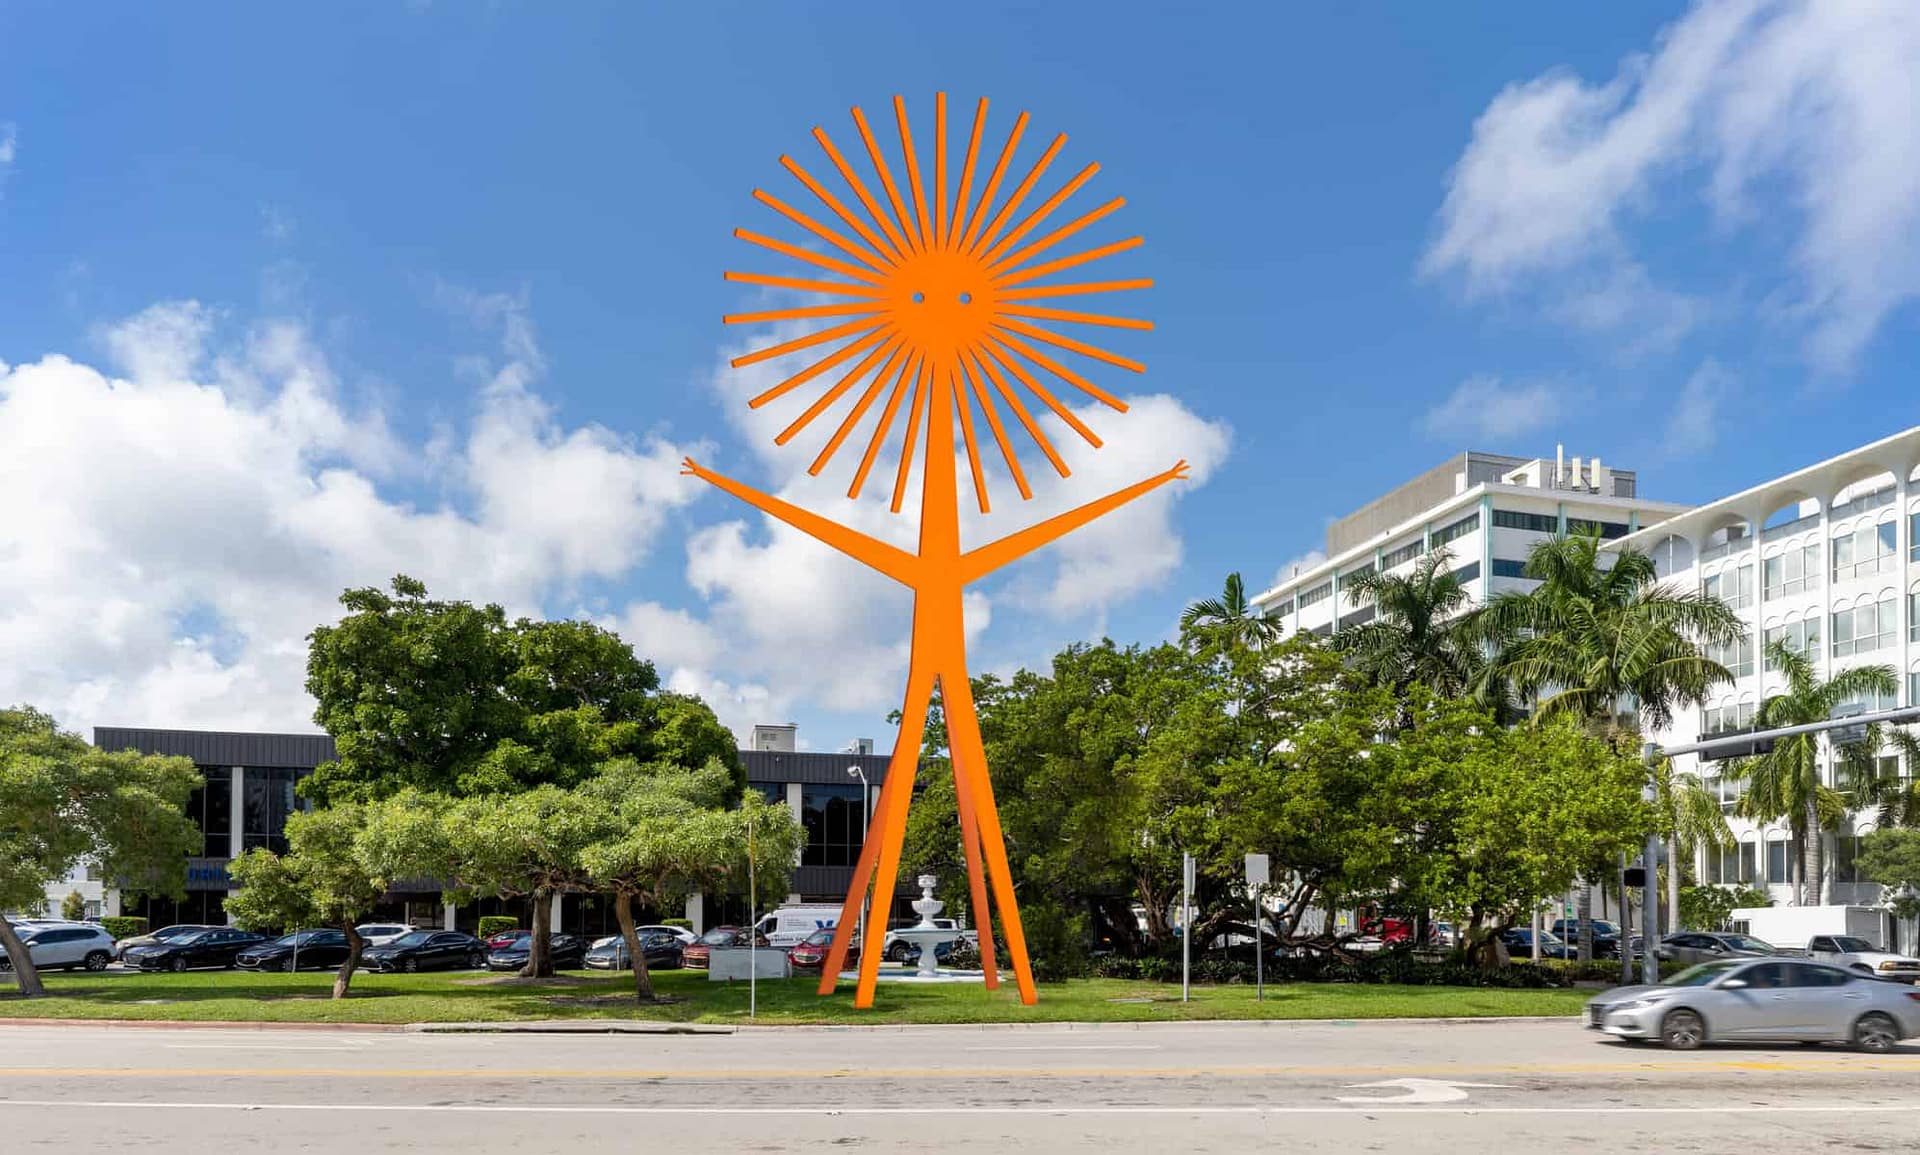 FriendsWithYou to unveil 50ft tall public sculpture, Starchild, for 2022 Miami Art Week.